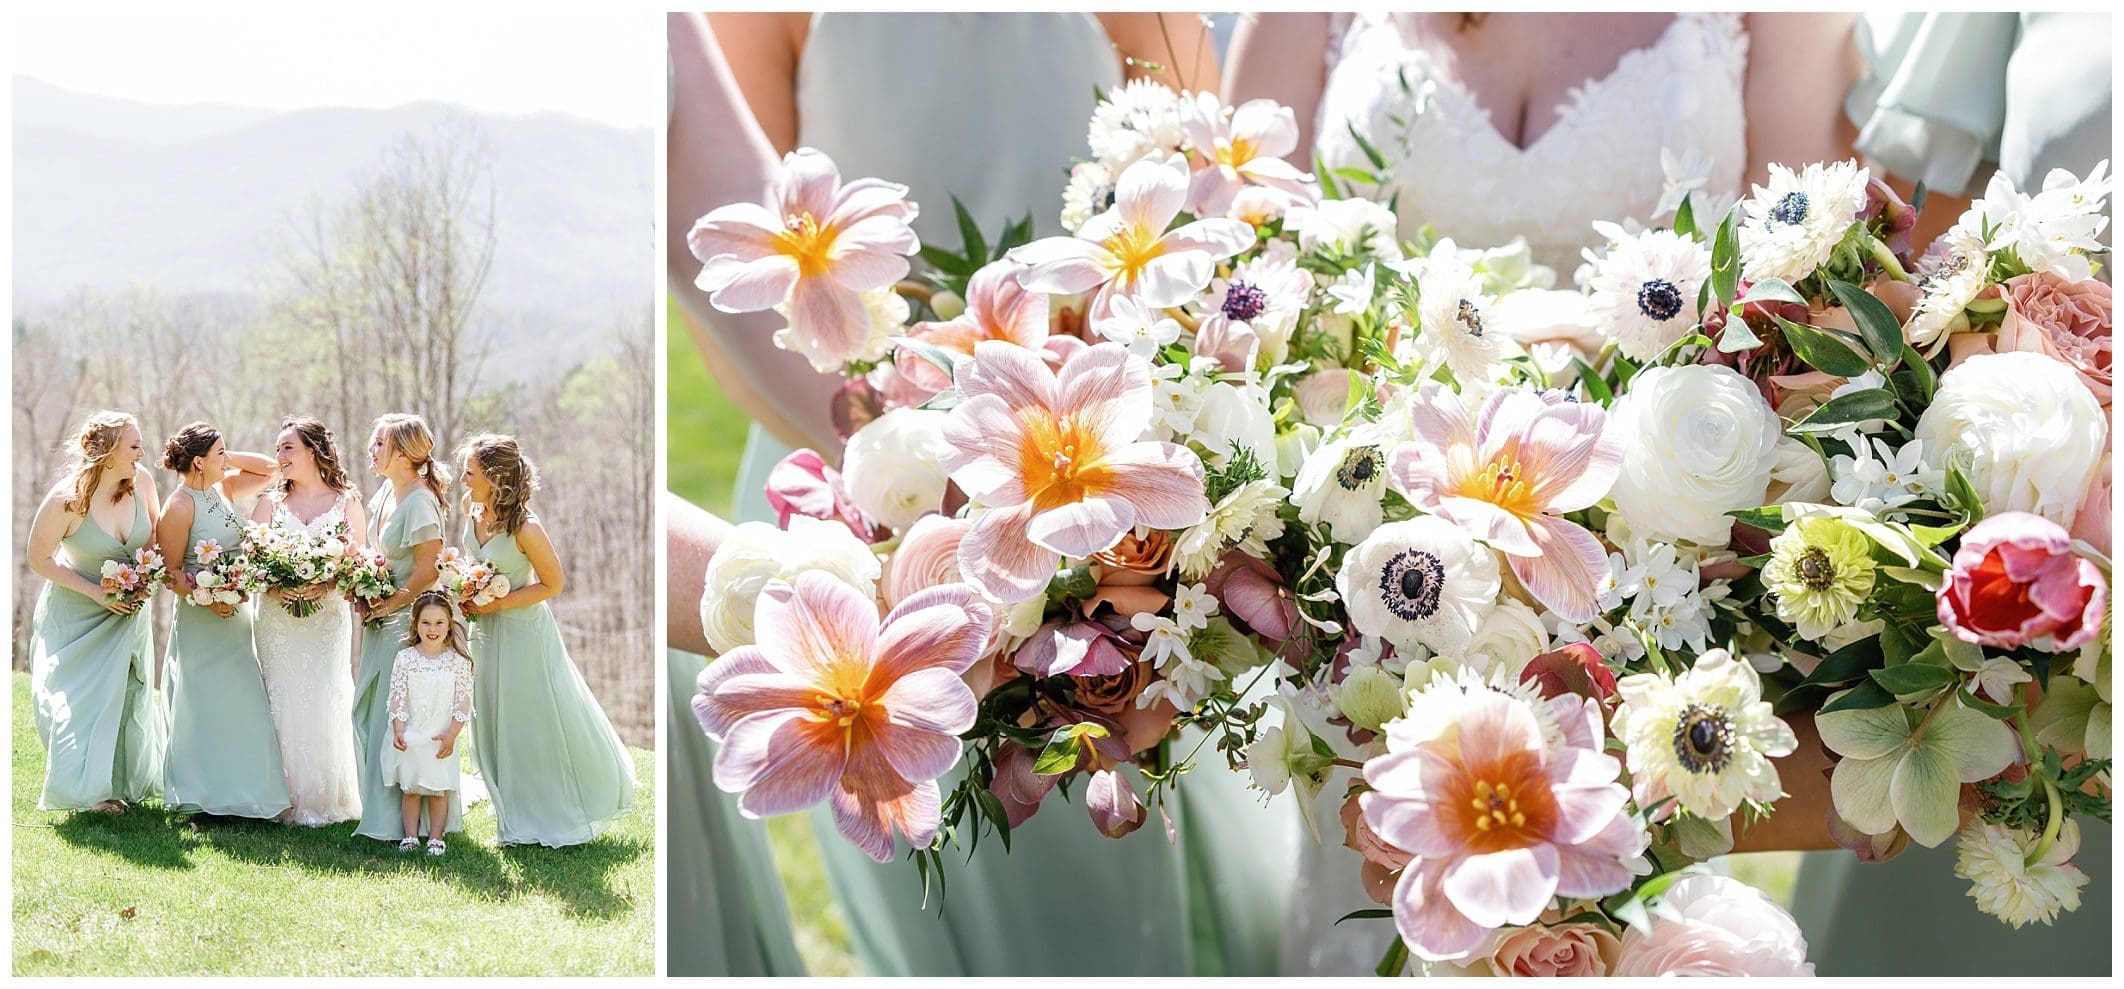 Joyful spring wedding at parker mill with spring blooms of pink and whie with accents of yellow